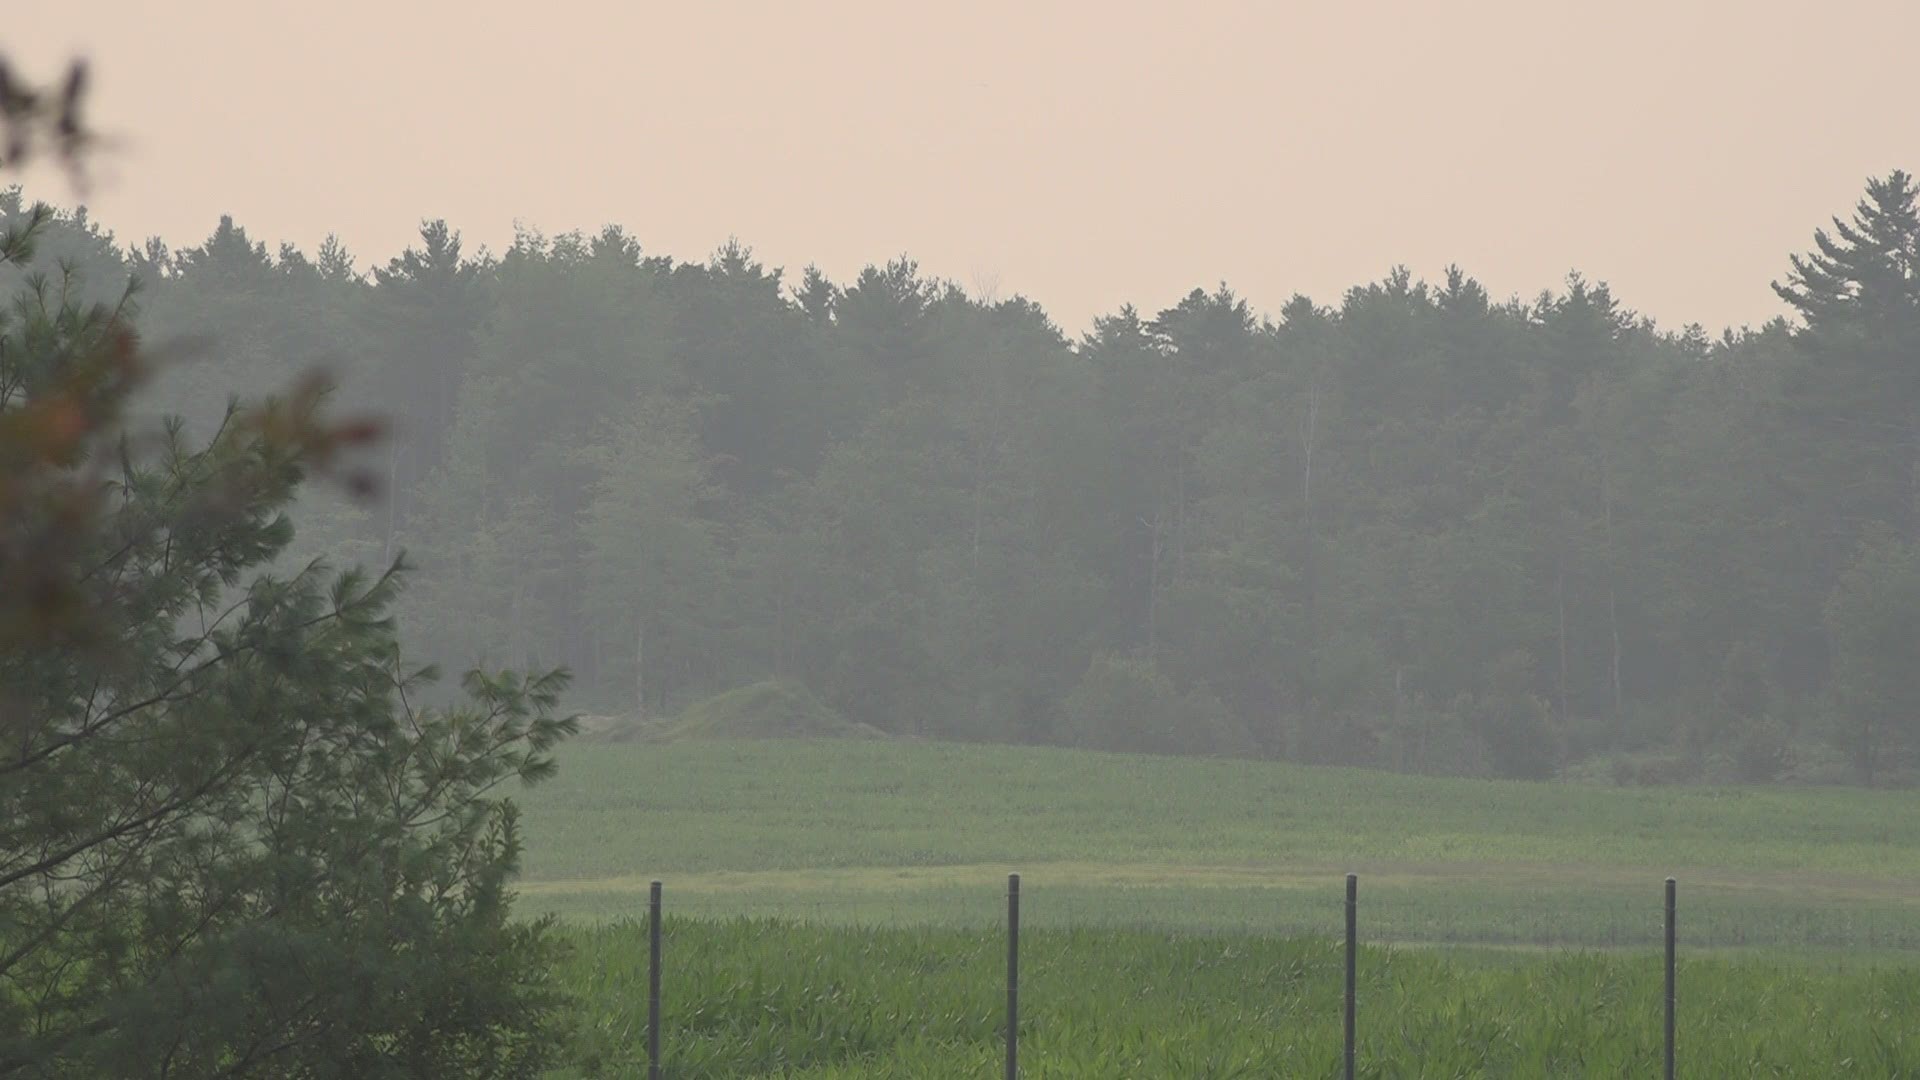 Smoke and haze has been moving into Maine as wildfires in Canada continue.